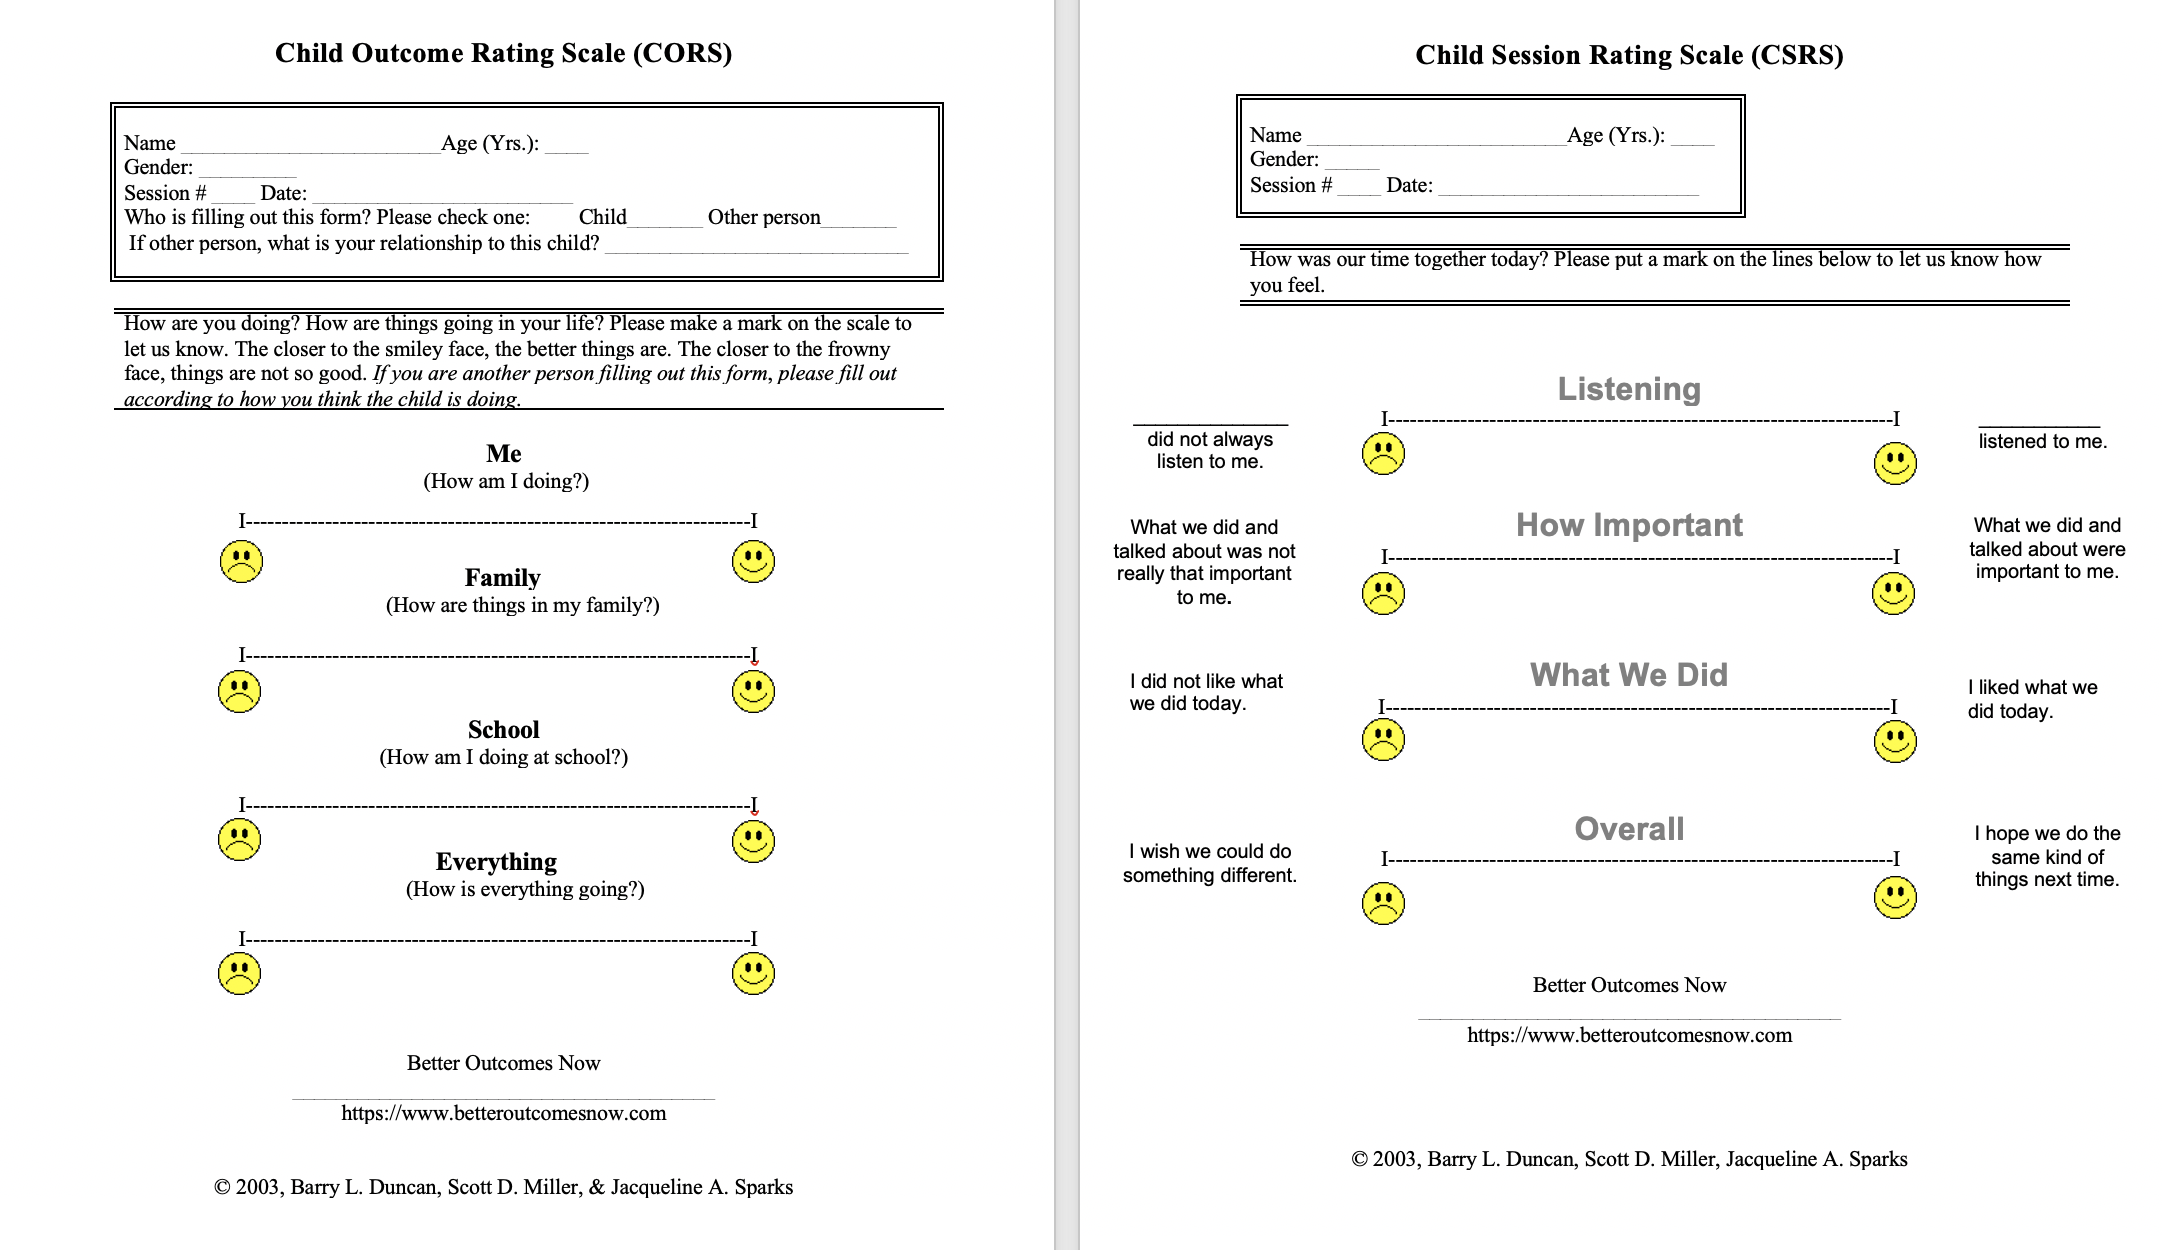 A Snapshot of the Child Outcome Rating Scale (CORS) and Child Session Rating Scale (CSRS)